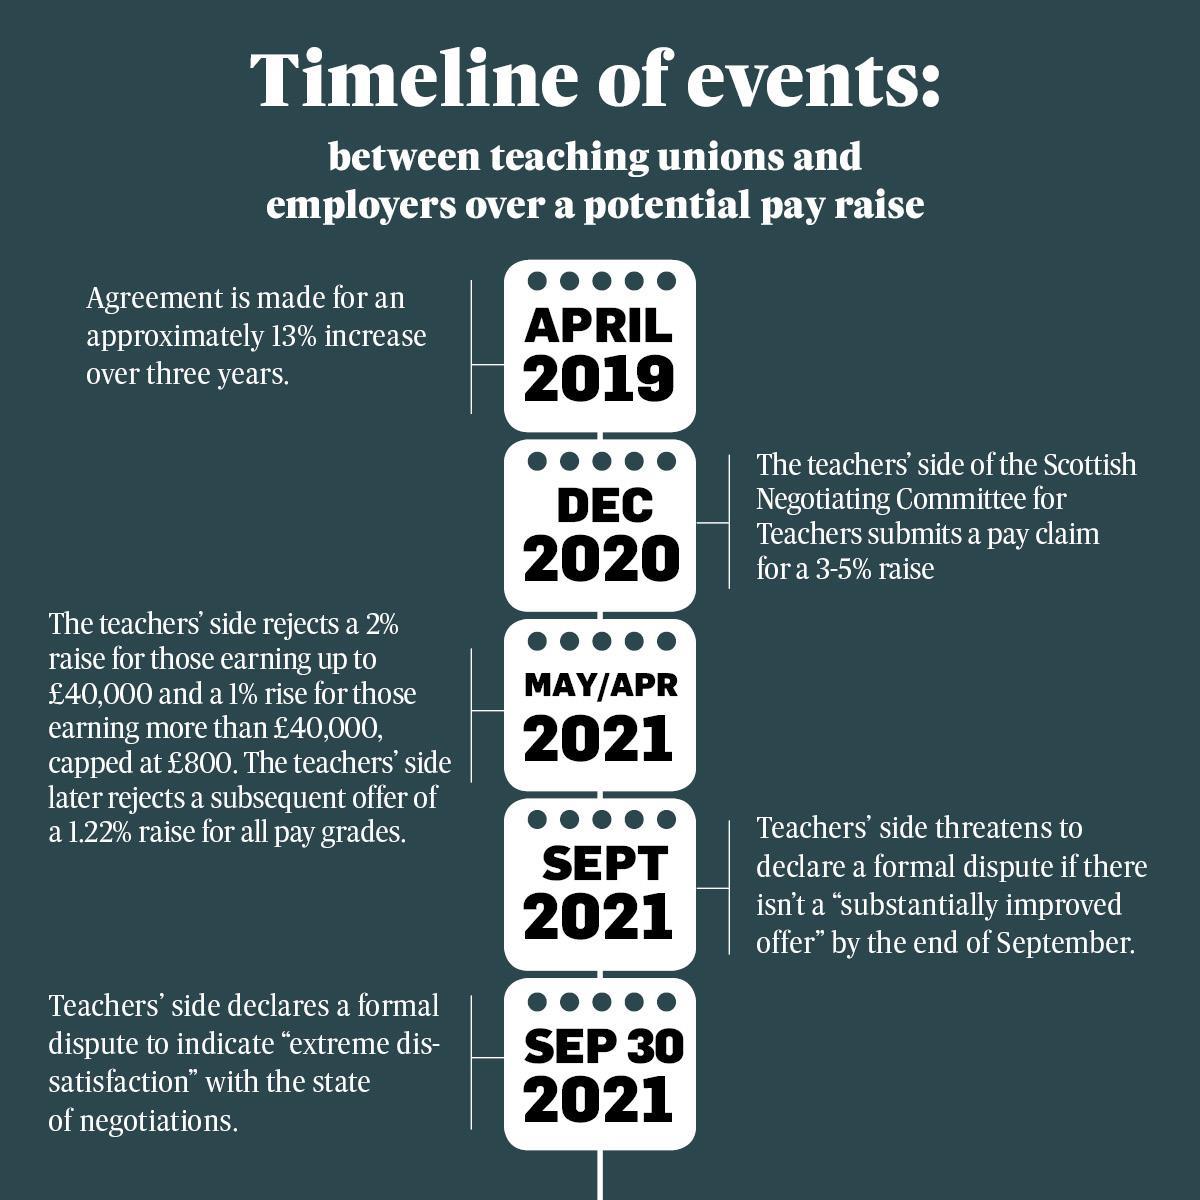 A timeline of events leading to the current Scotland teacher salary dispute, beginning with a pay claim from teachers in Dec 2020, two refused offers and the current dispute filed at the end of September 2021.